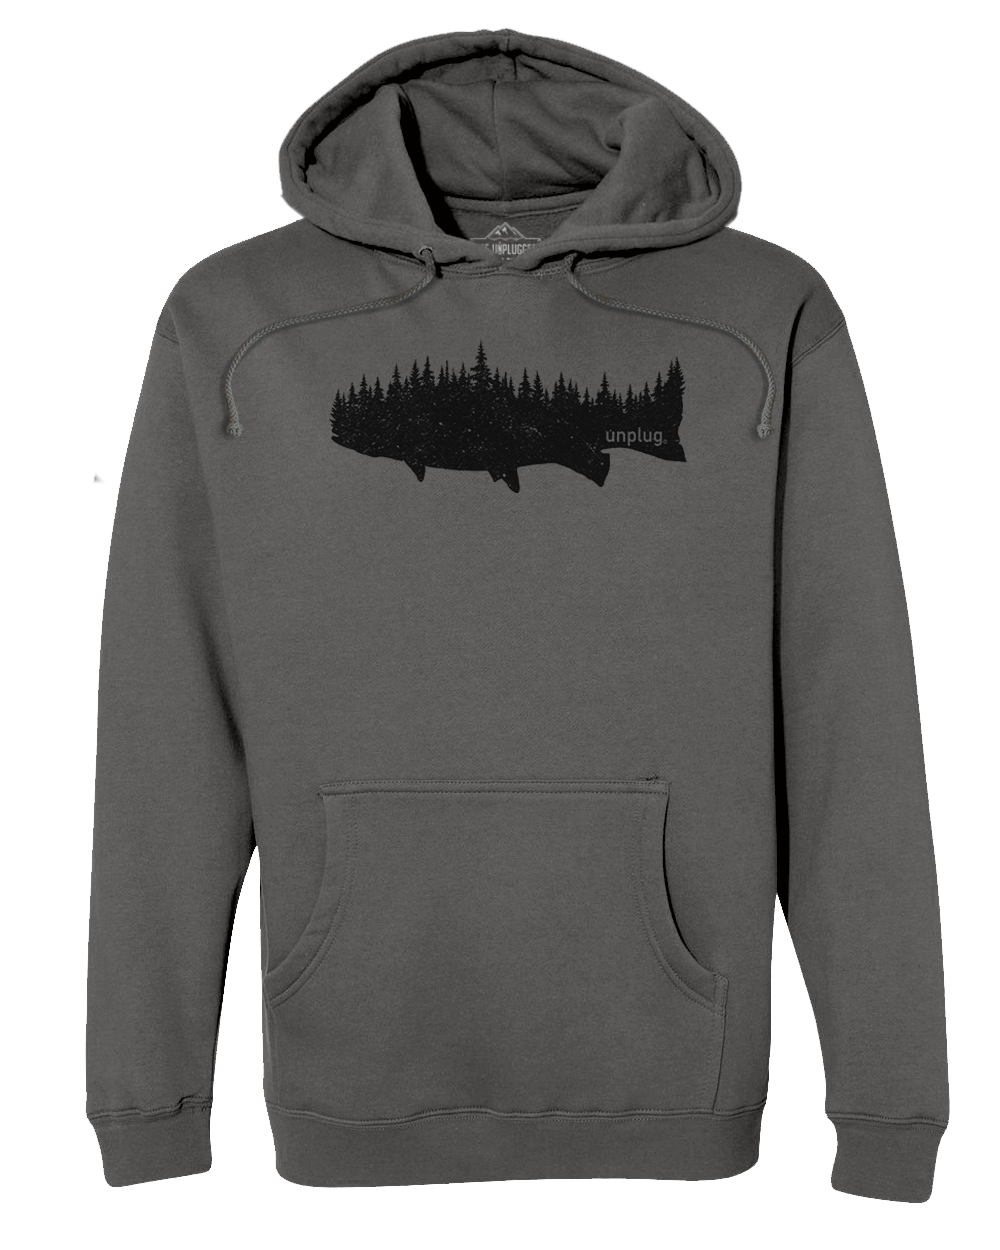 TROUT IN THE TREES Premium Heavyweight Hooded Sweatshirt